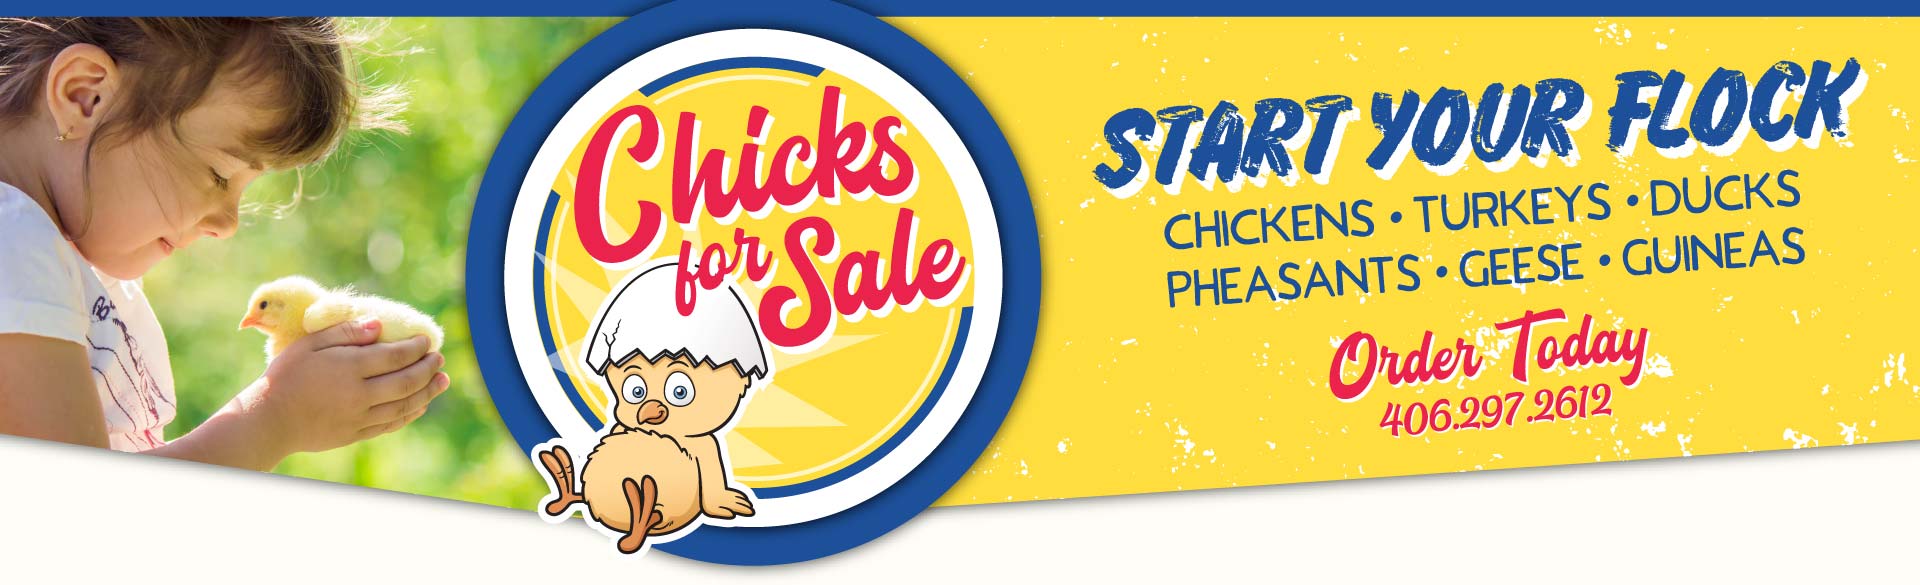 chicks for sale banner with picture of cartoon chicken